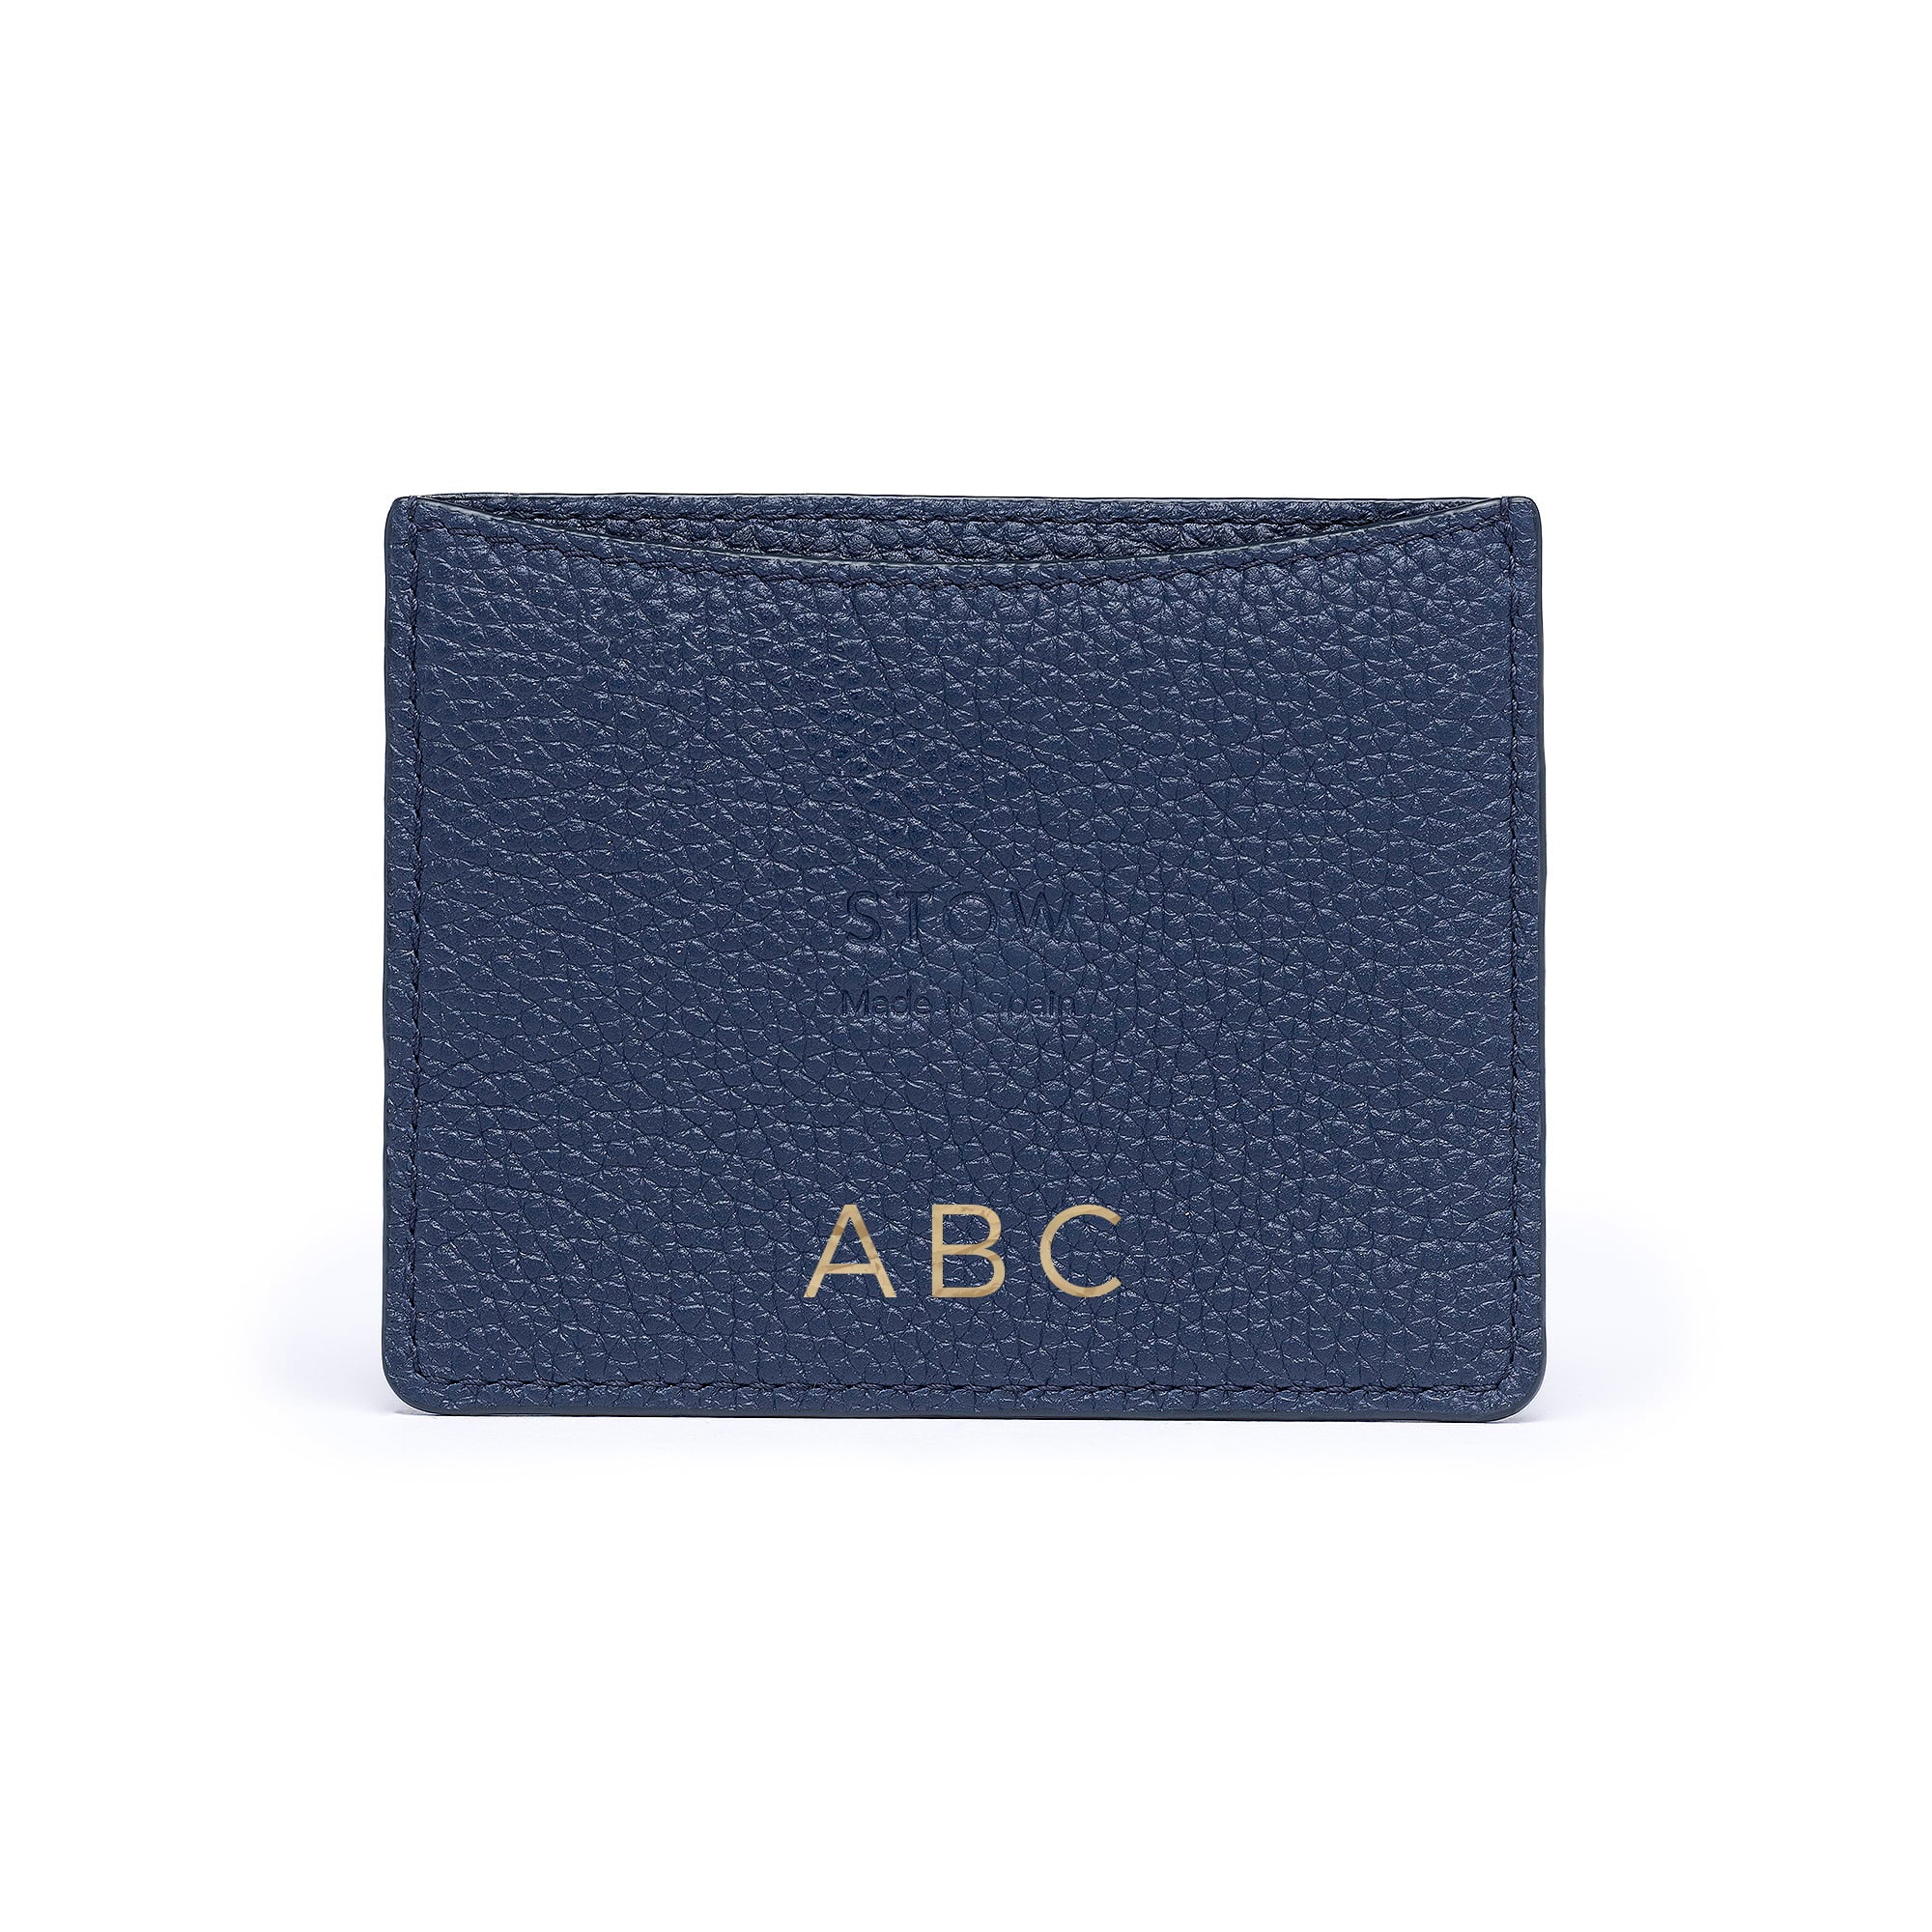 STOW Leather Cardholder in Navy colour with personalised initials.